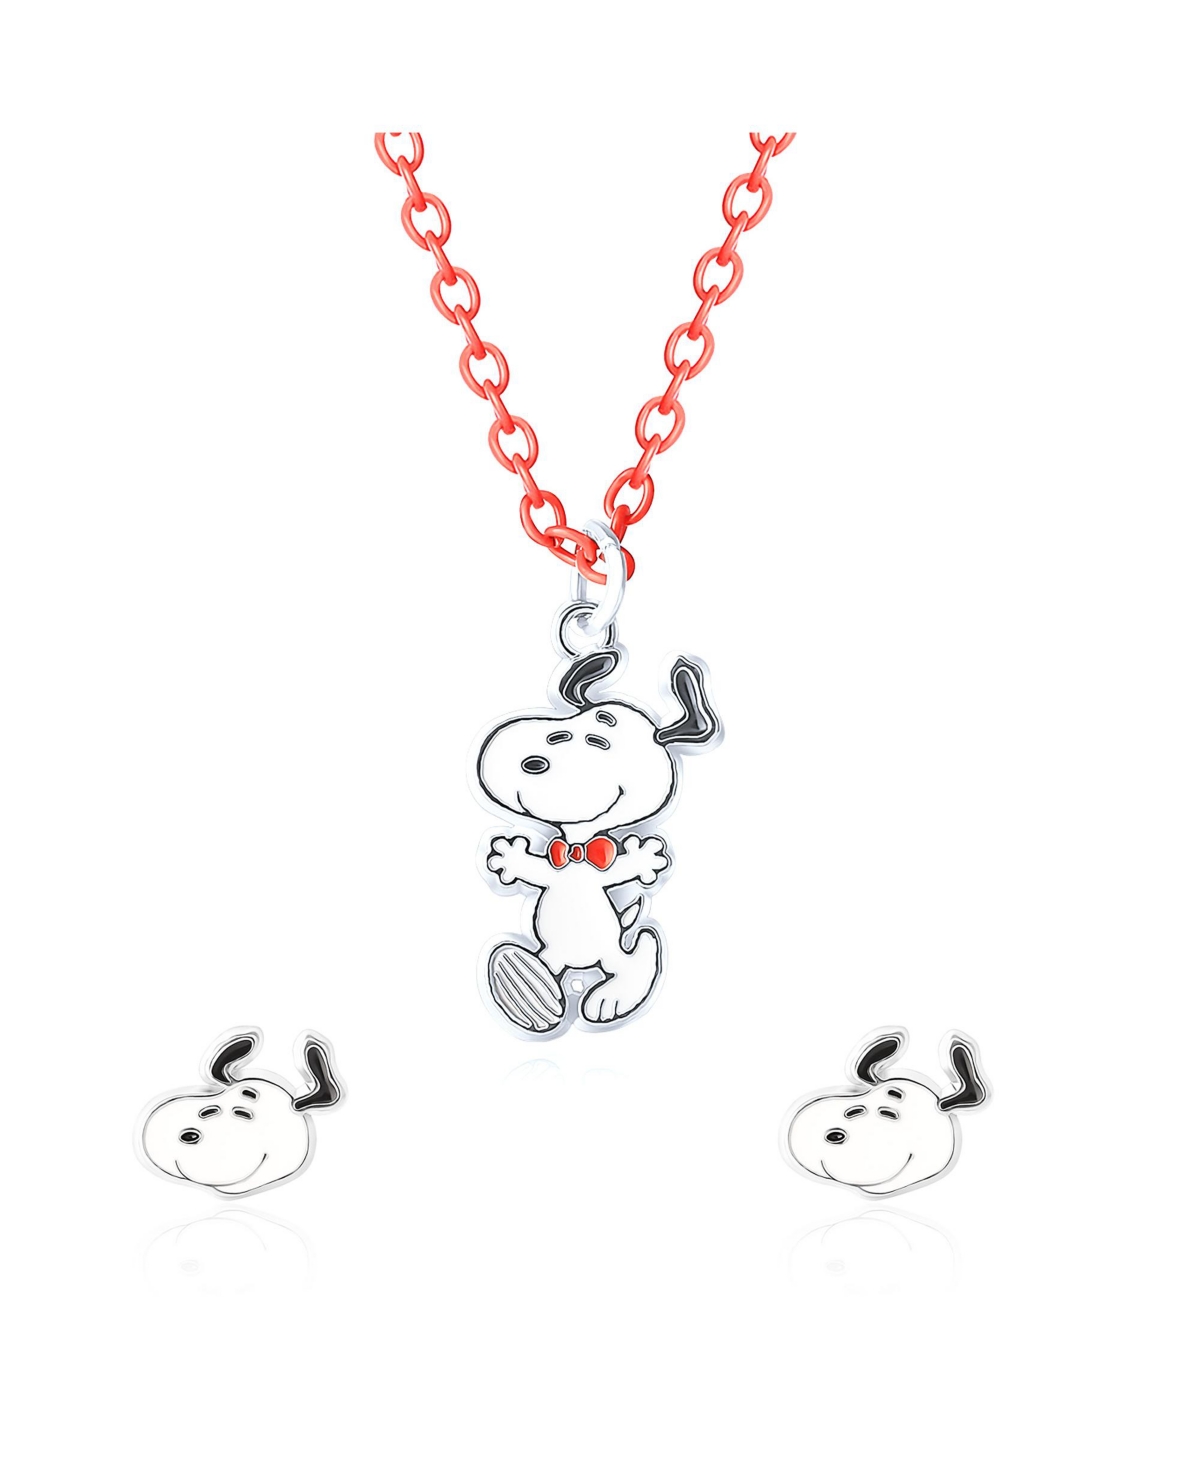 Snoopy Fashion Necklace and Earring Set, 16 + 3'' Chain - Red, white, black